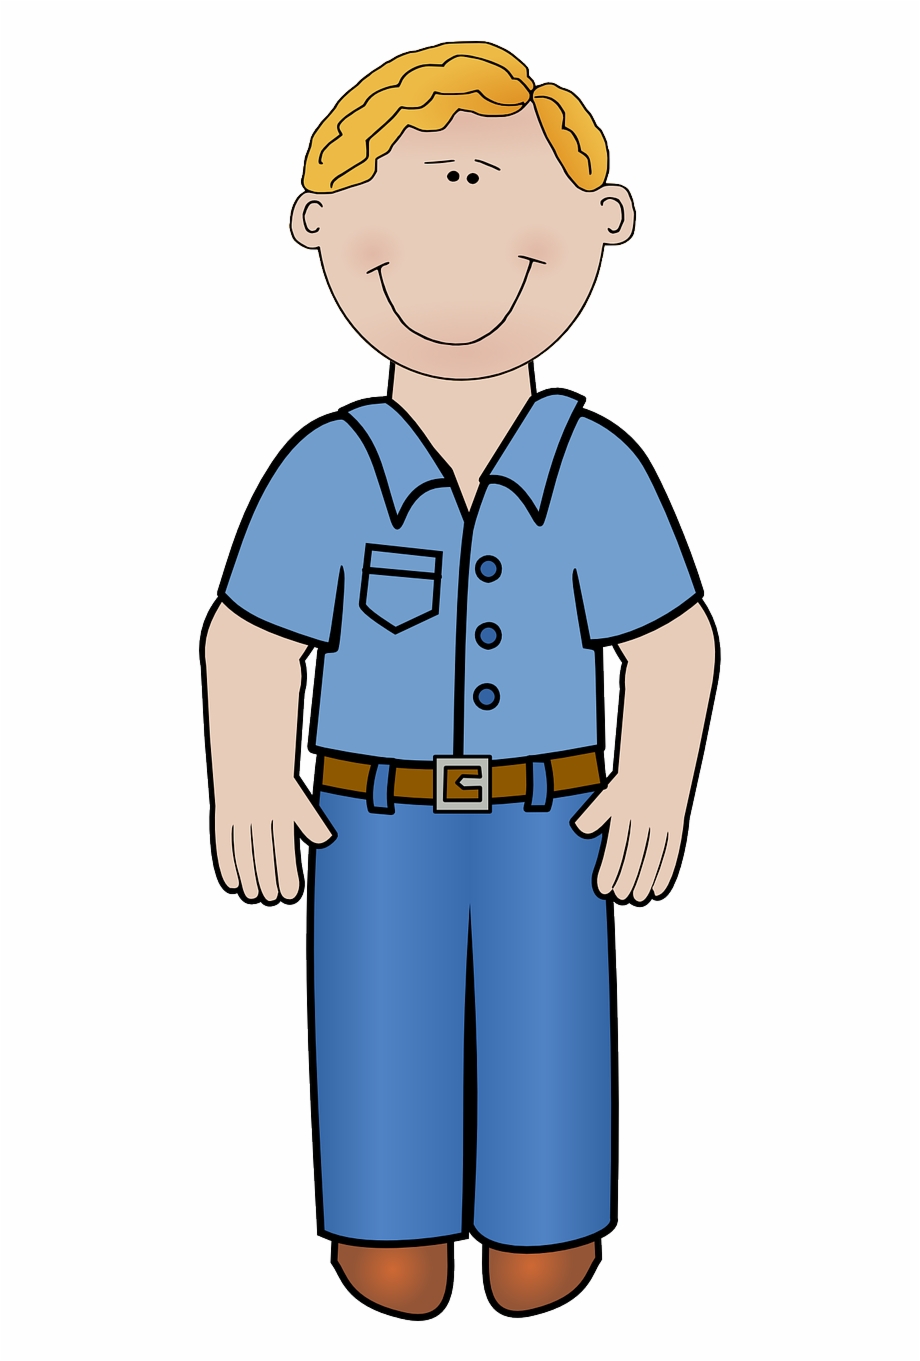 Boy Adult Man People Smiling Png Image Clipart